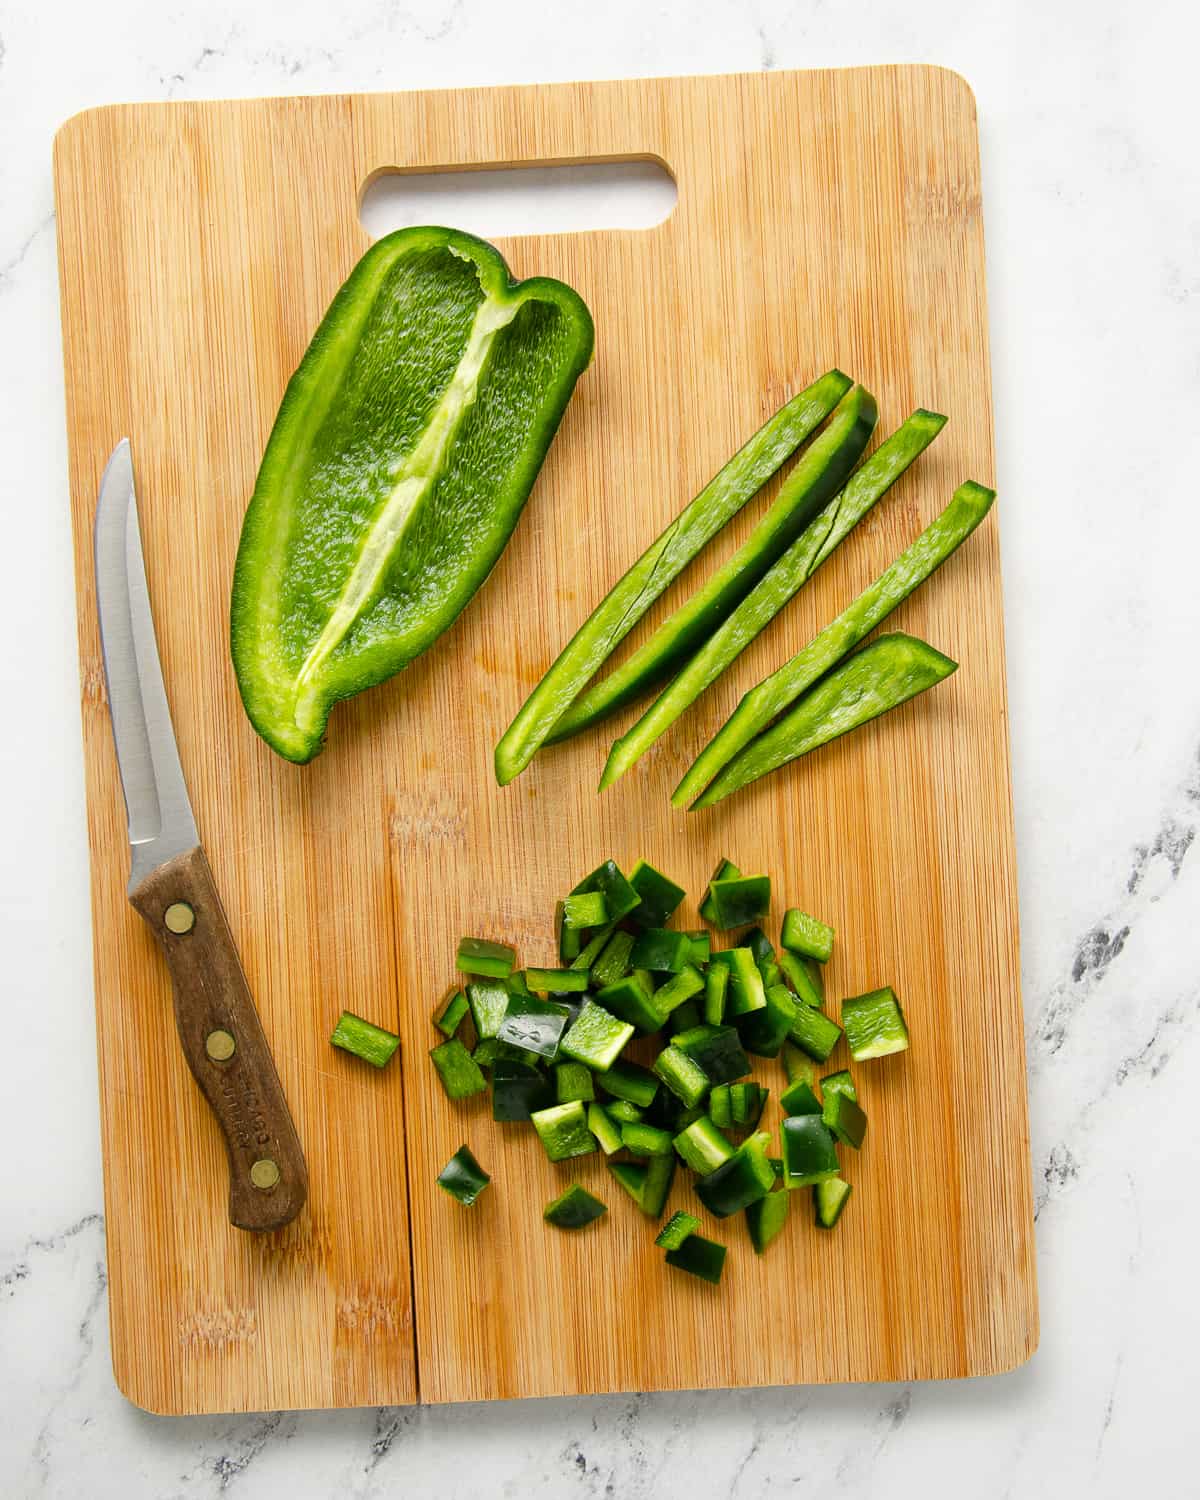 Cutting a poblano in the three stages: cutting the sides, then slicing into thin strips and then finally dicing it.